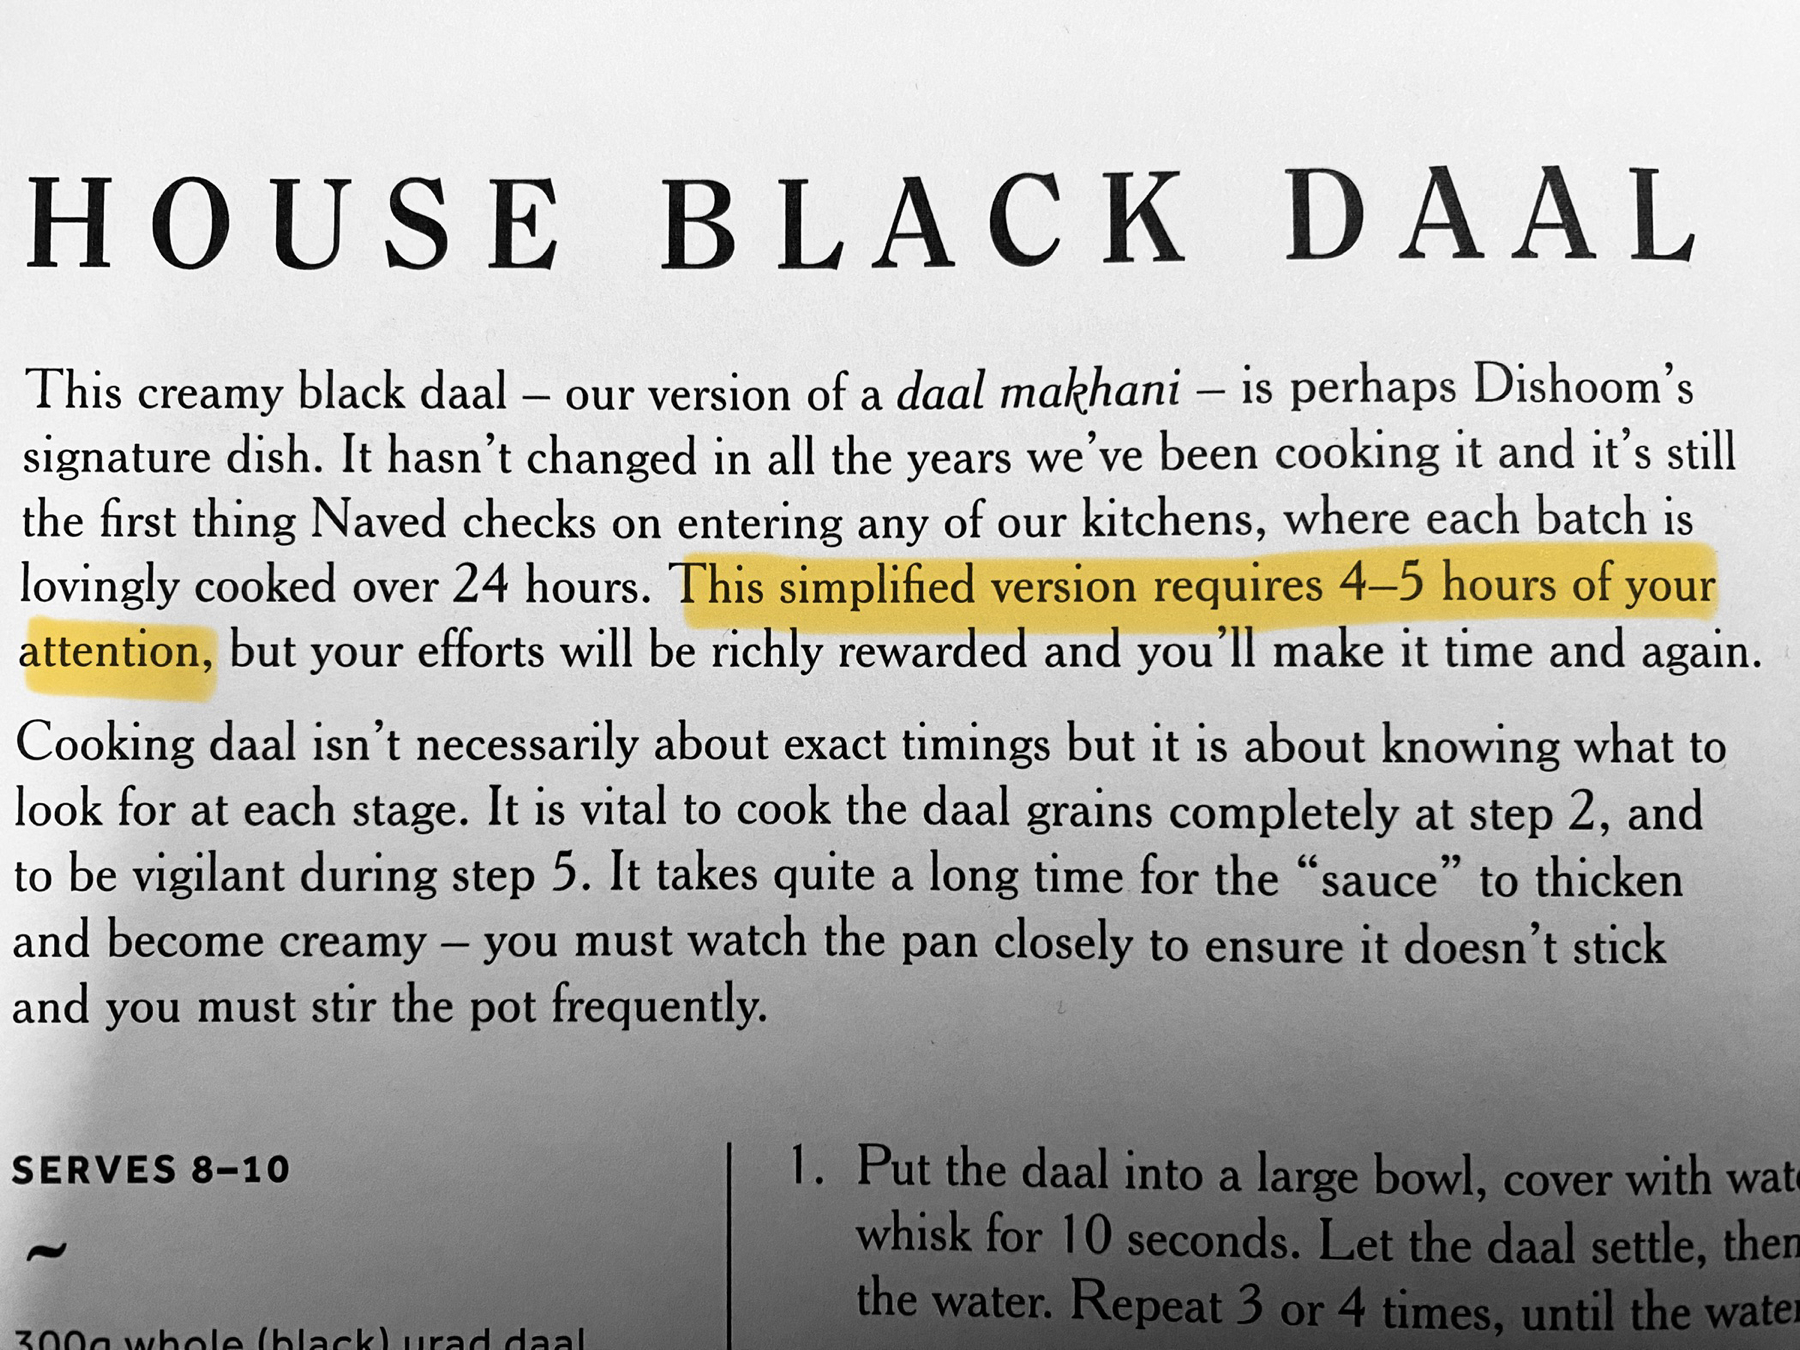 Photograph of a cookbook page detailing a recipe for House Black Daal. The text describes the dish as a version of daal makhani, a signature dish of Dishoom that is cooked over 24 hours.